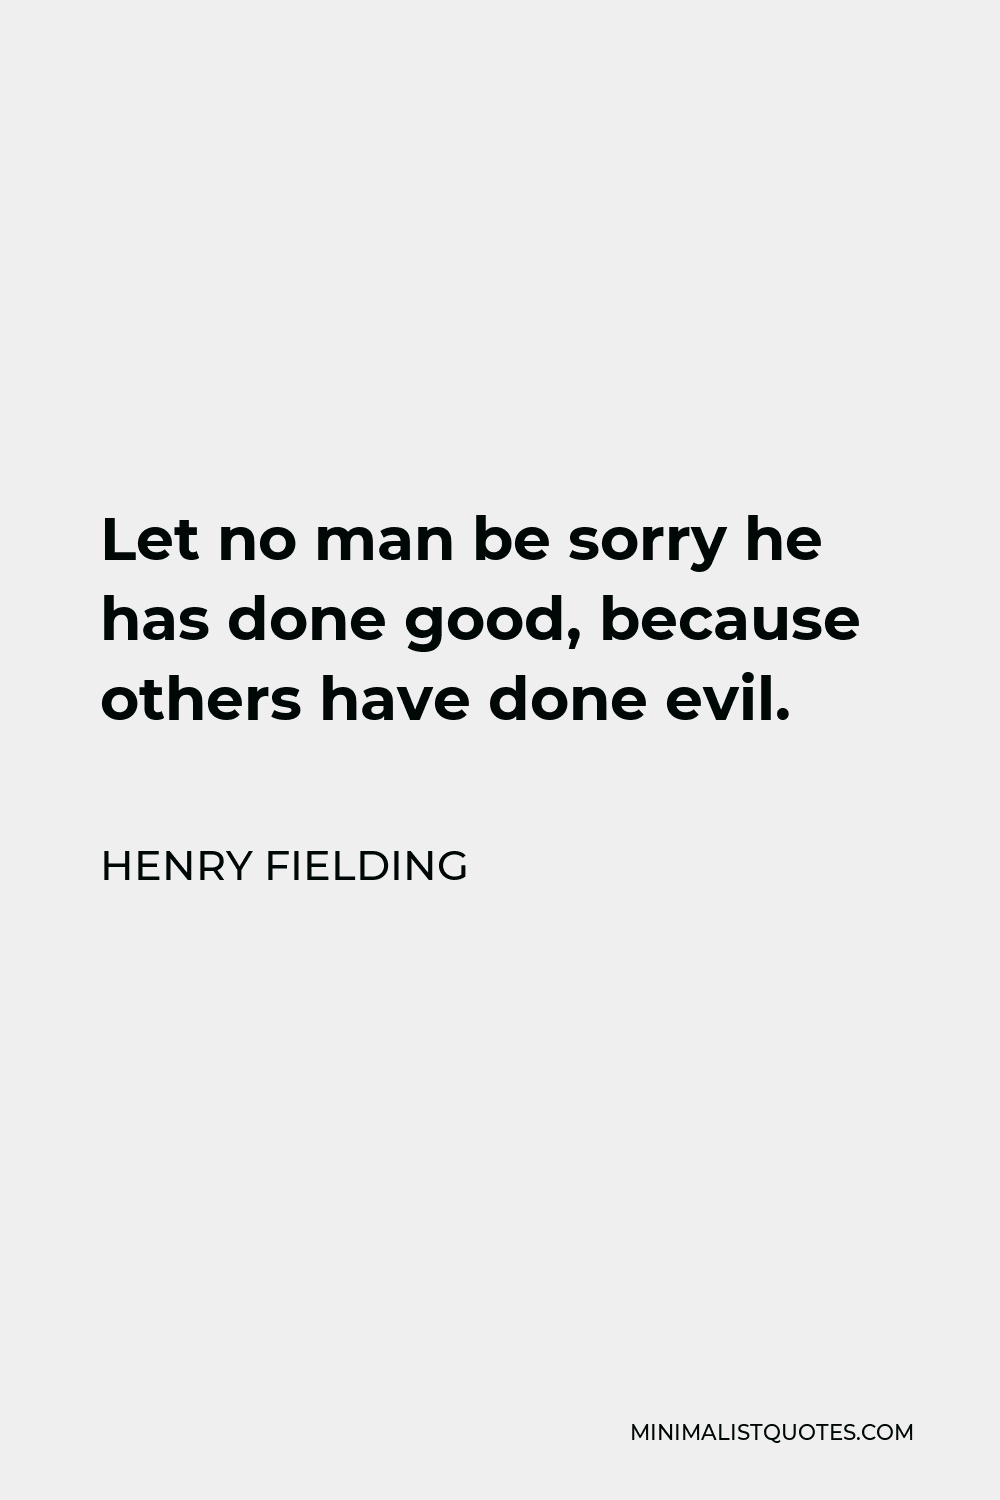 Henry Fielding Quote - Let no man be sorry he has done good, because others have done evil.